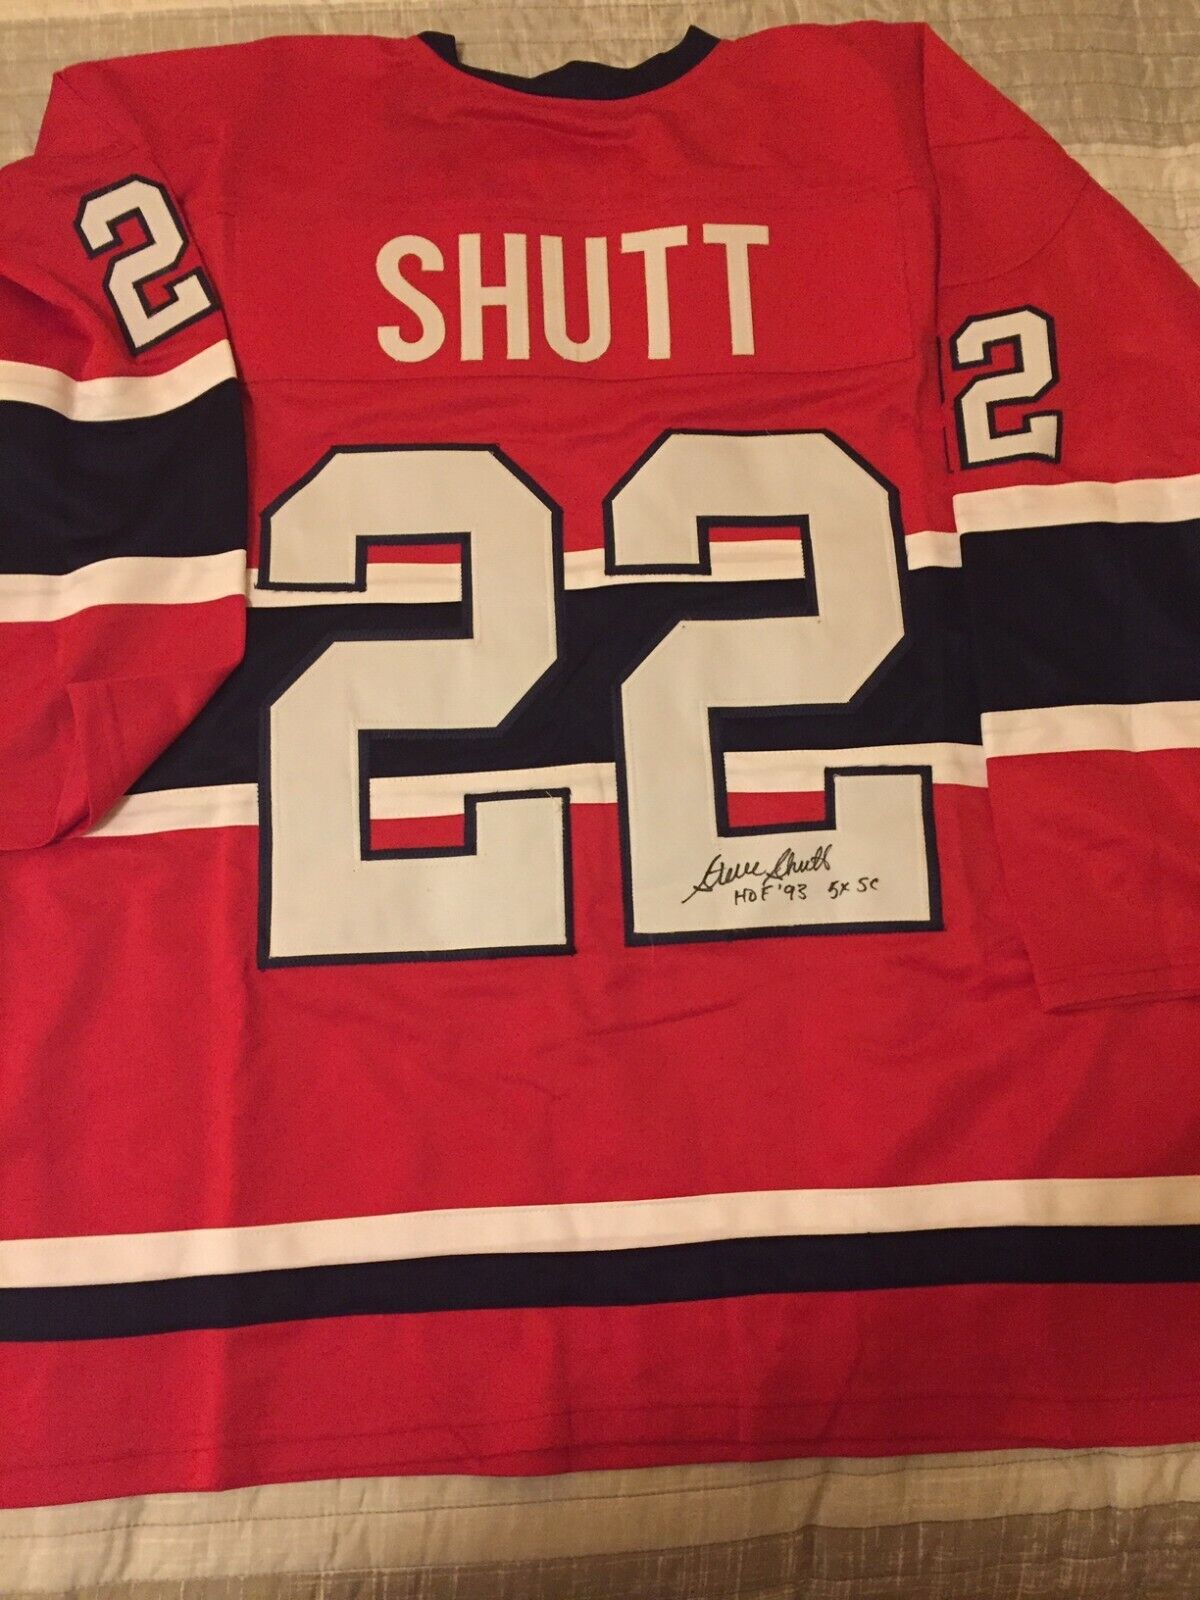 Canadiens Steve Shutt Signed Jersey With Hof And 5x Sc Inscription W/coa